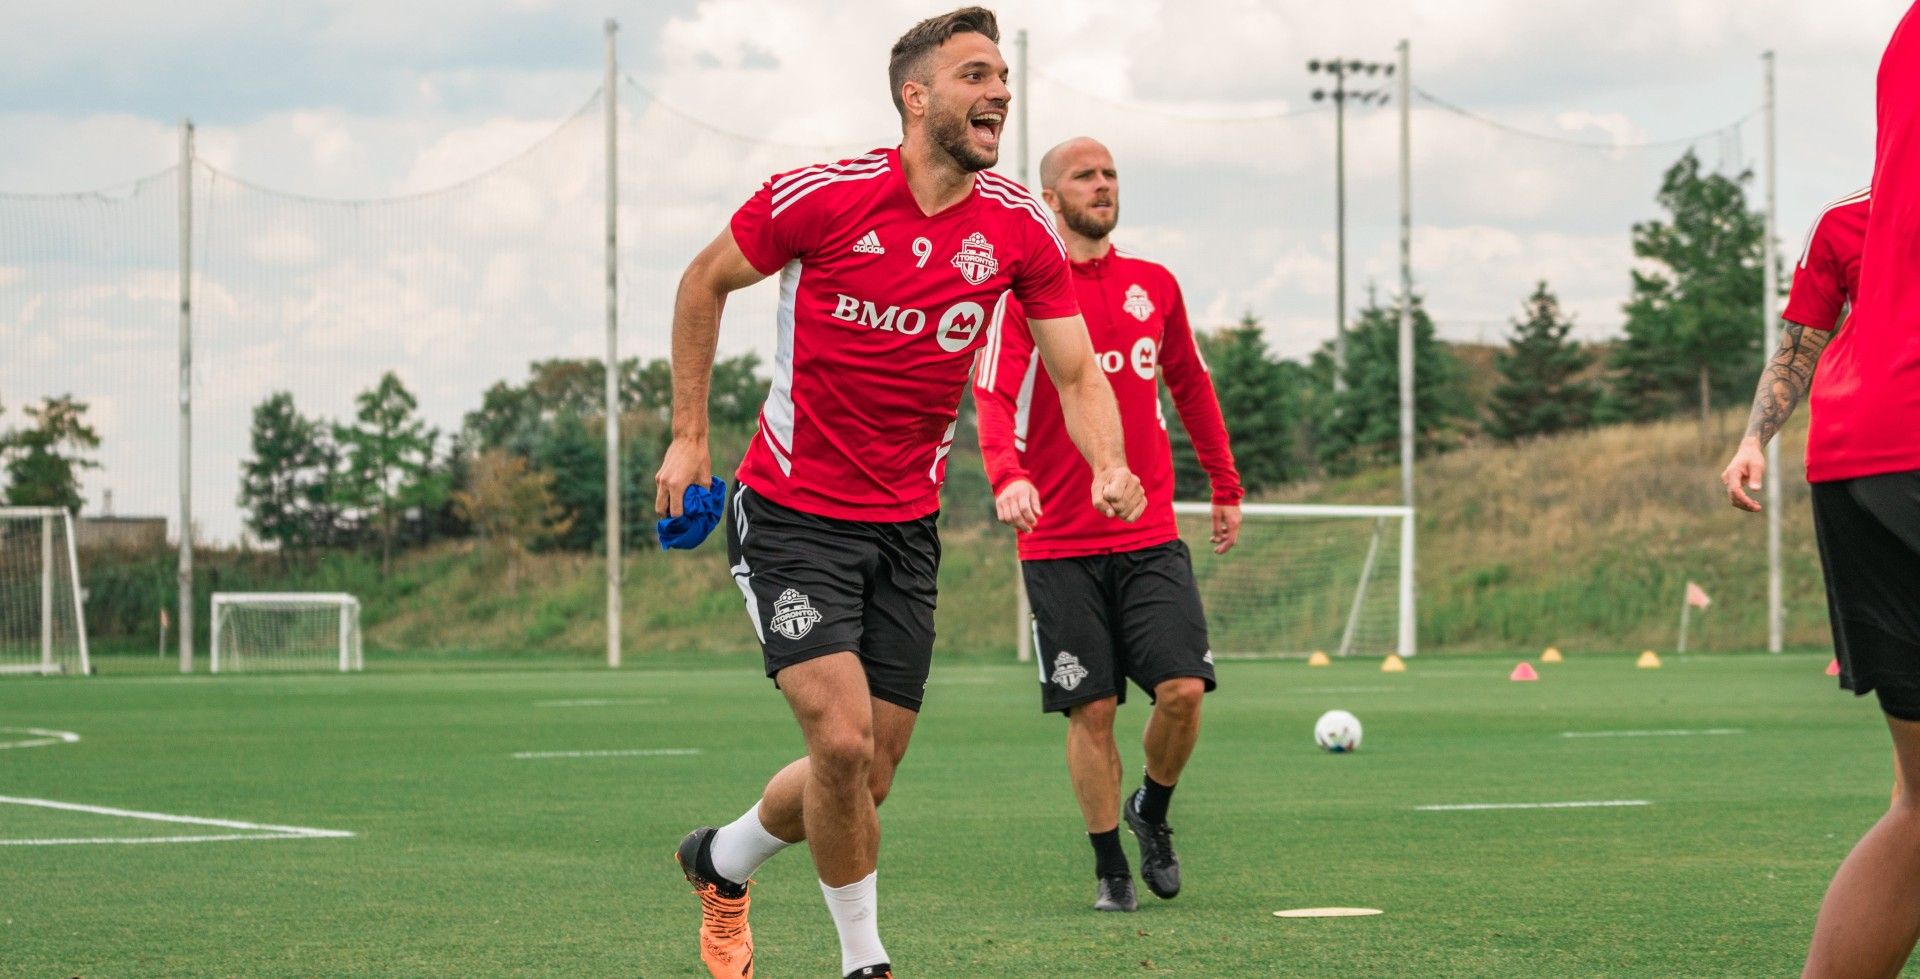 Toronto FC vs. New England: What you need to know